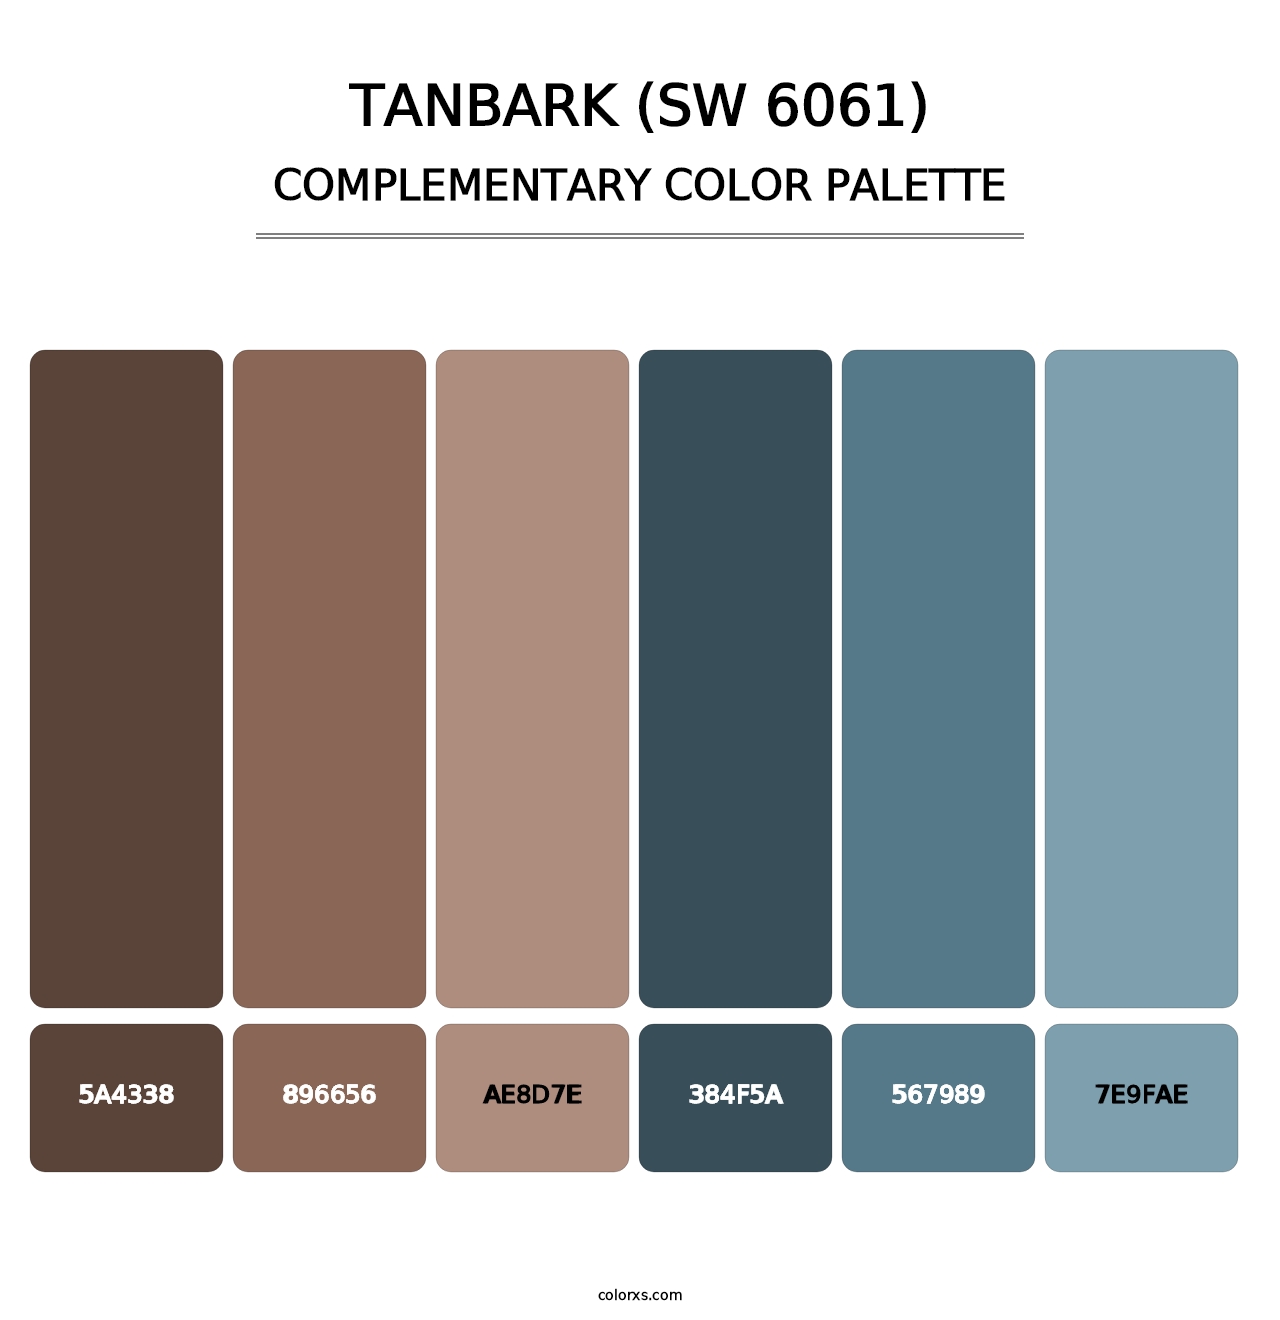 Tanbark (SW 6061) - Complementary Color Palette